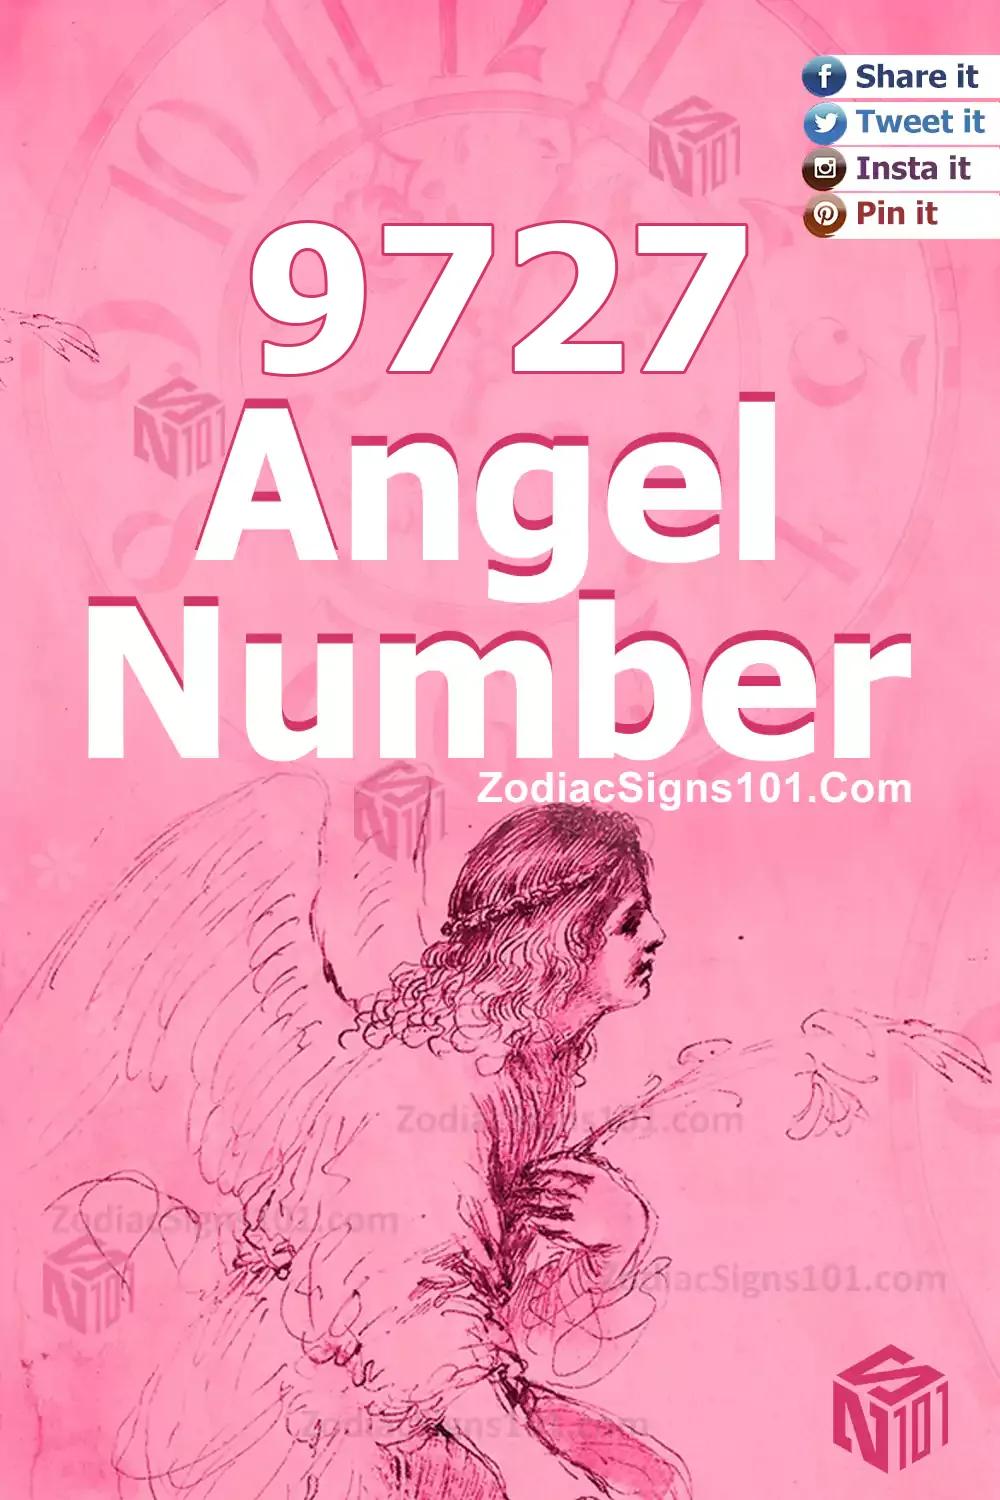 9727 Angel Number Meaning